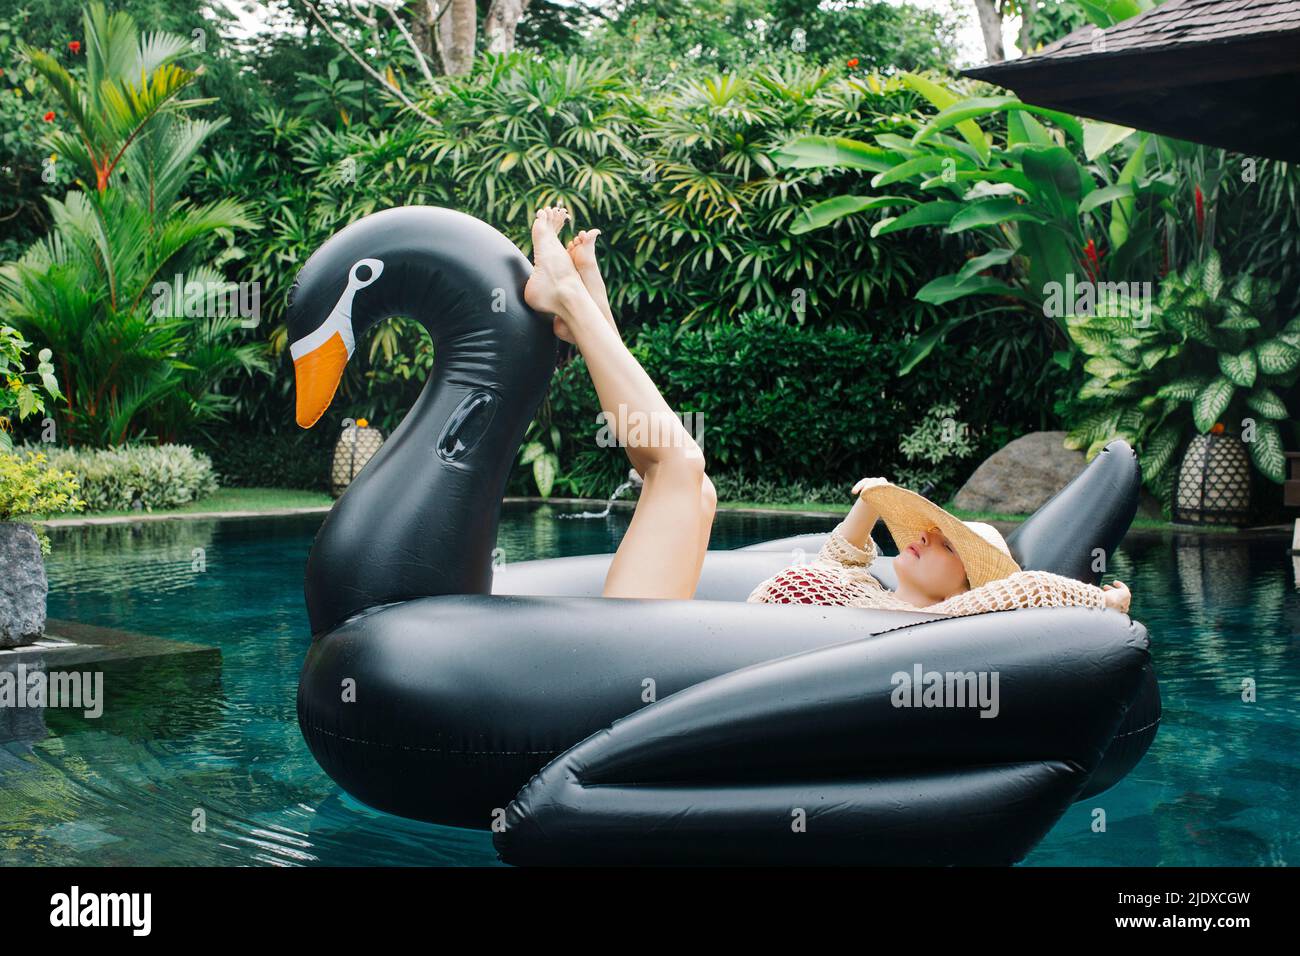 Young woman relaxing on swan shaped swimming float Stock Photo